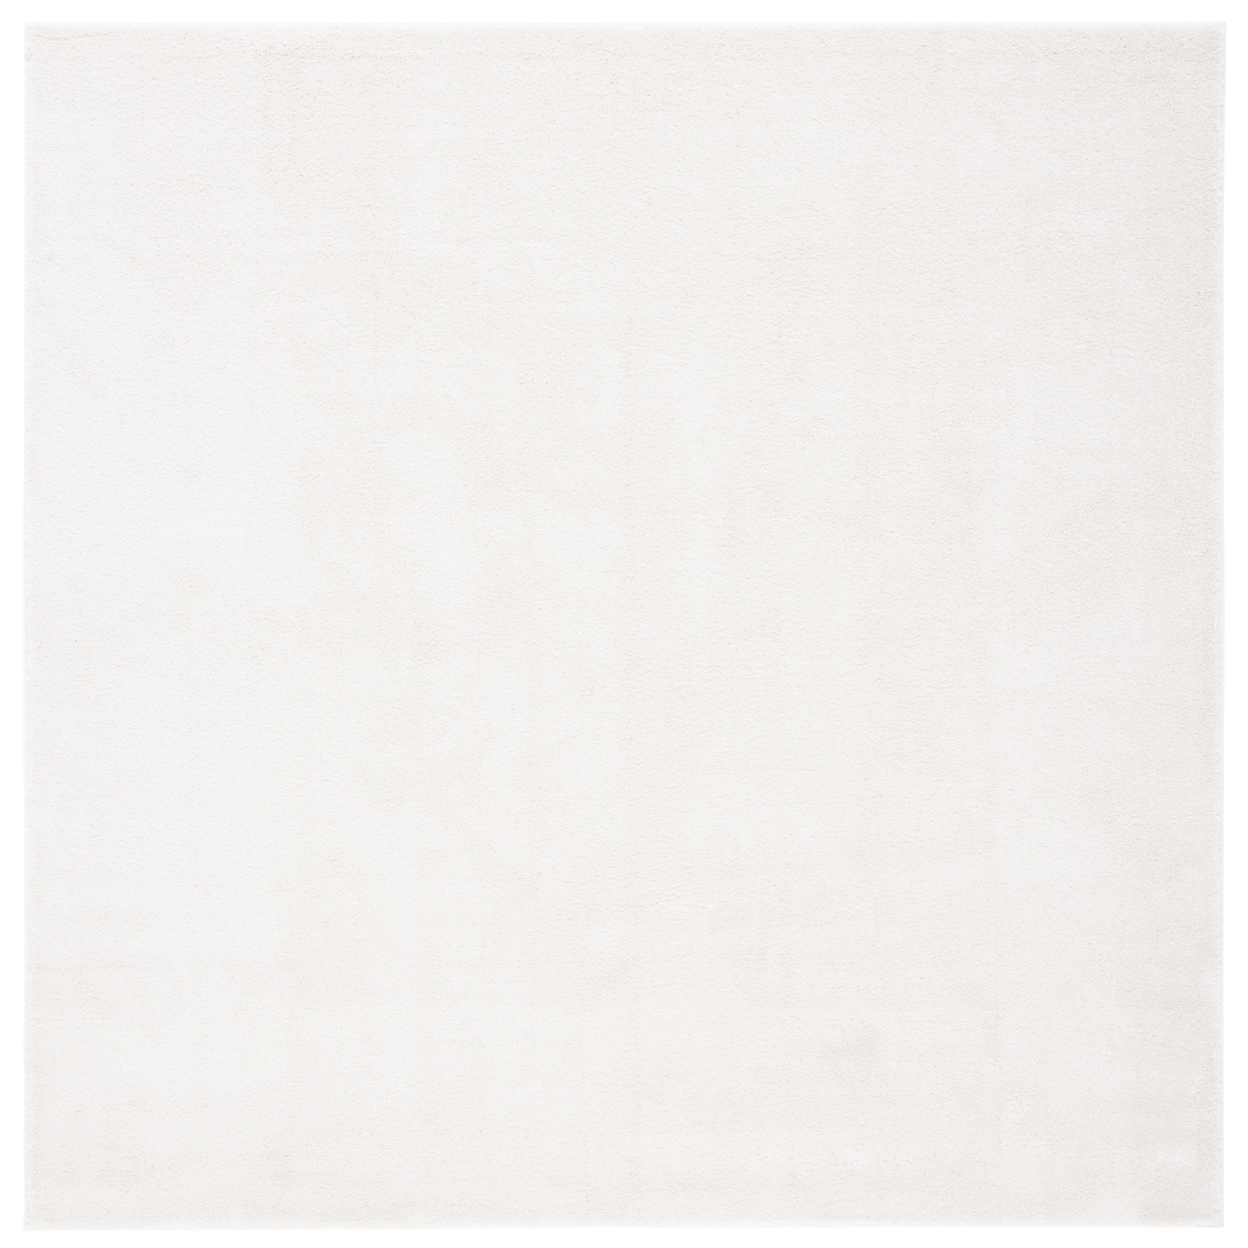 SAFAVIEH Non-slip Collection NSD420A Ivory Rug - 6' 7 Square